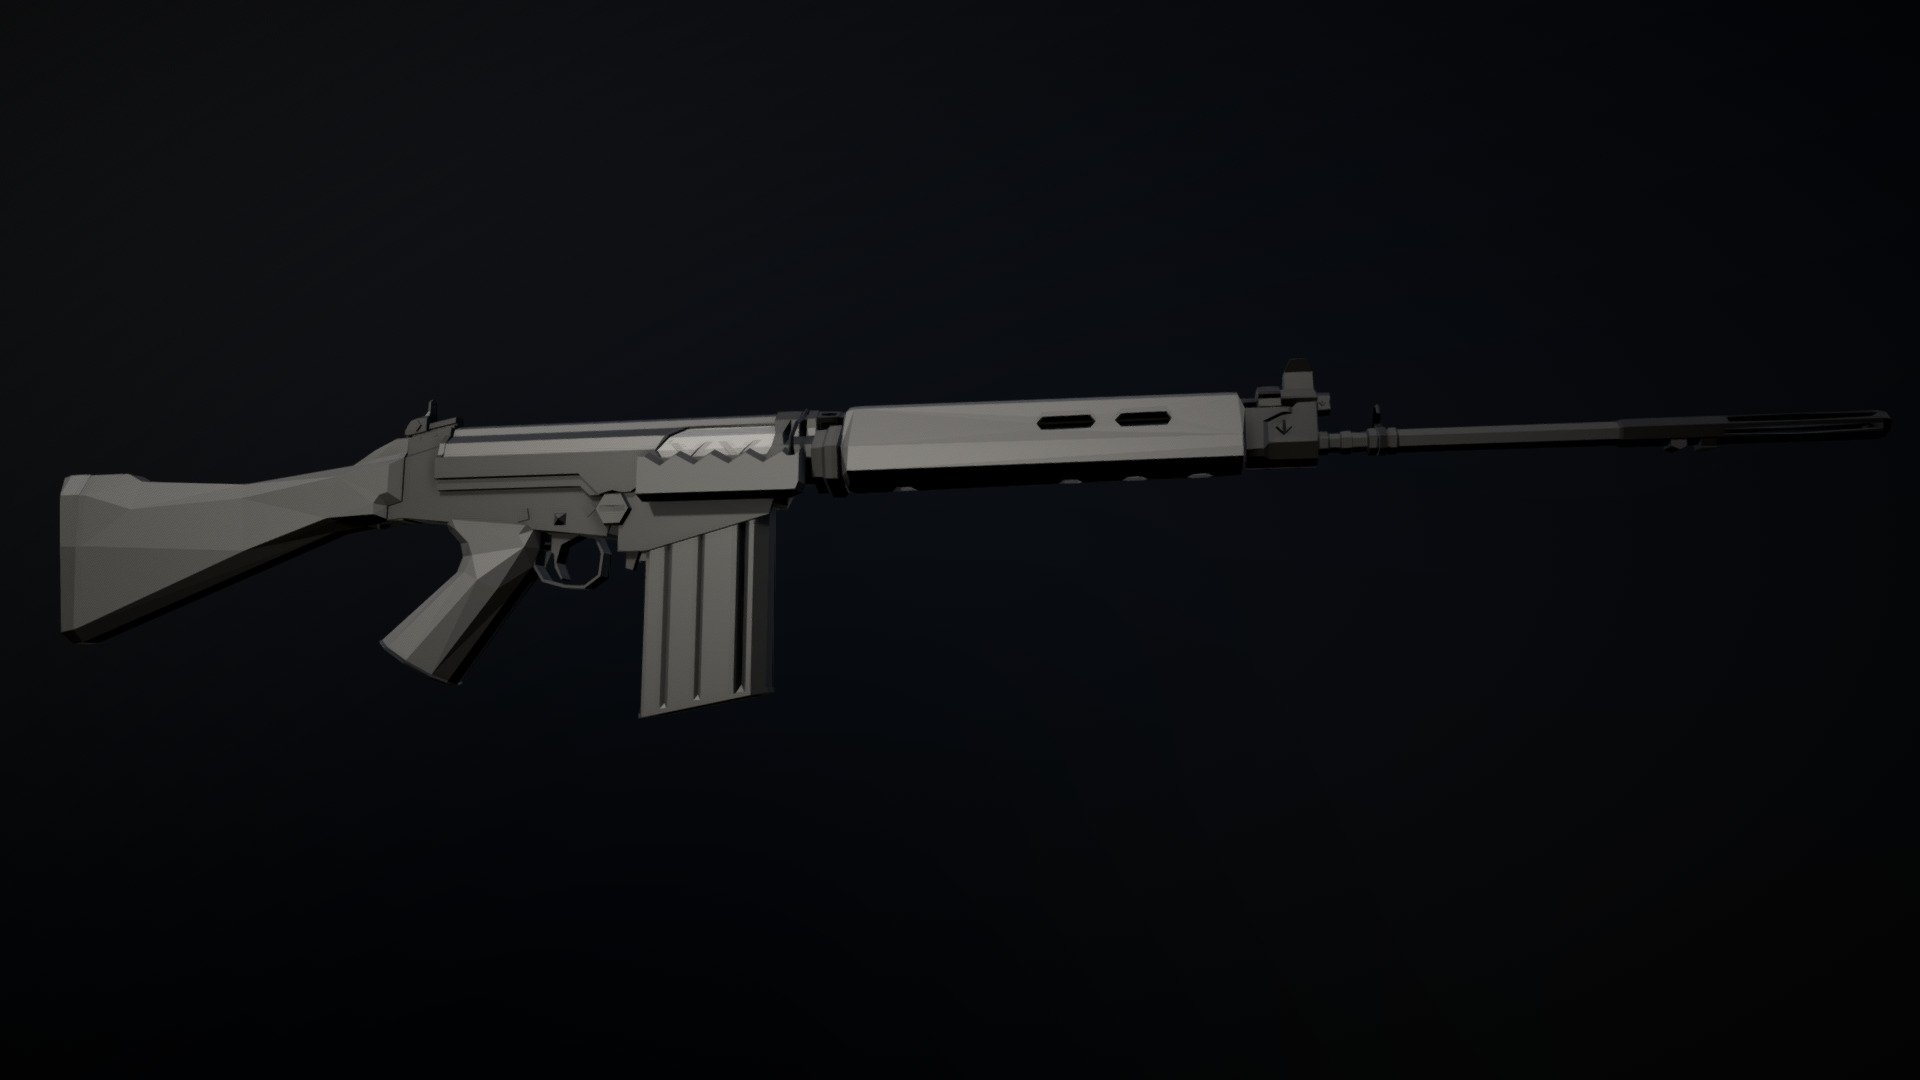 Low-Poly model of an L1A1 Self-Loading rifle (SLR) with polymer furniture. The L1A1 is a rifle that was produced in the commonwealth under license, with production patterns taken from FN and converted to imperial units and standards. This causes some incompatability between the two types of FAL rifles, and is also why FAL rifles are often referred to as either &ldquo;inch pattern